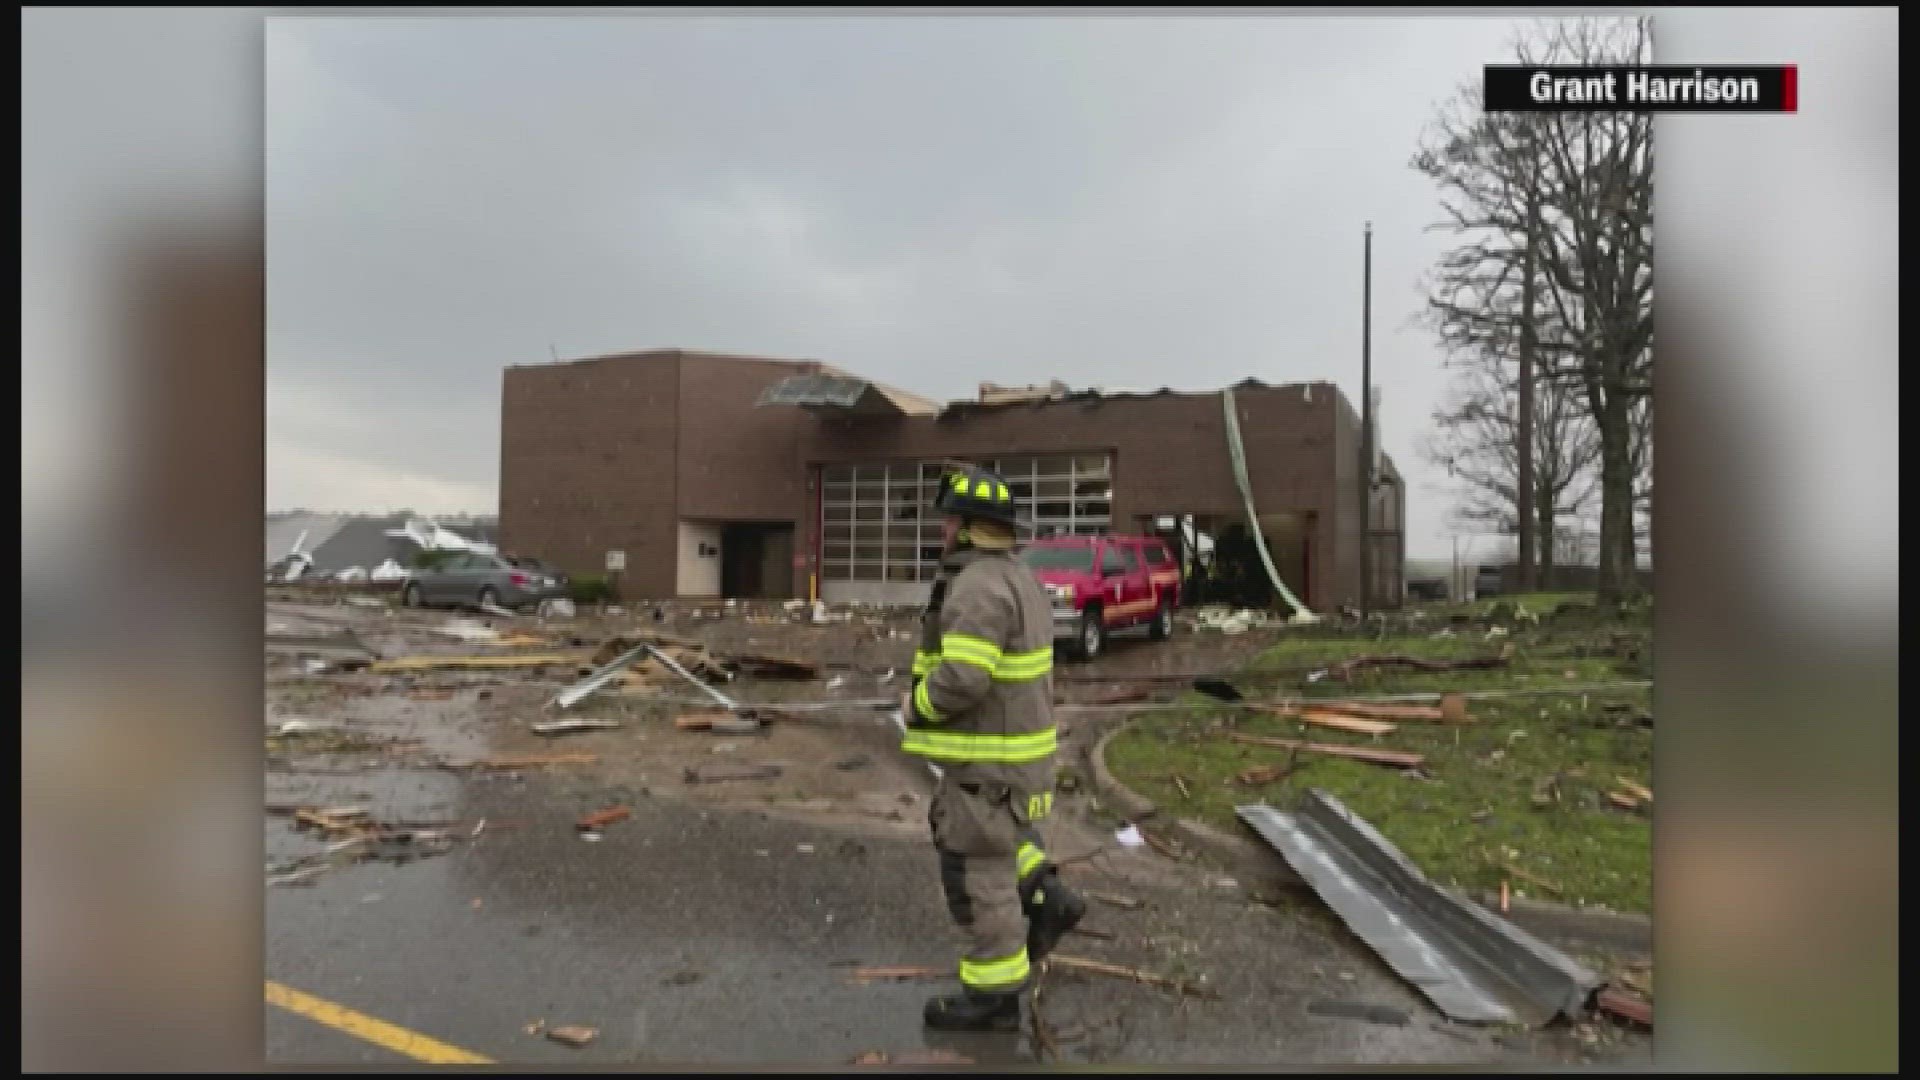 The emergency management said the person injured after the severe storm was transported to a local hospital.